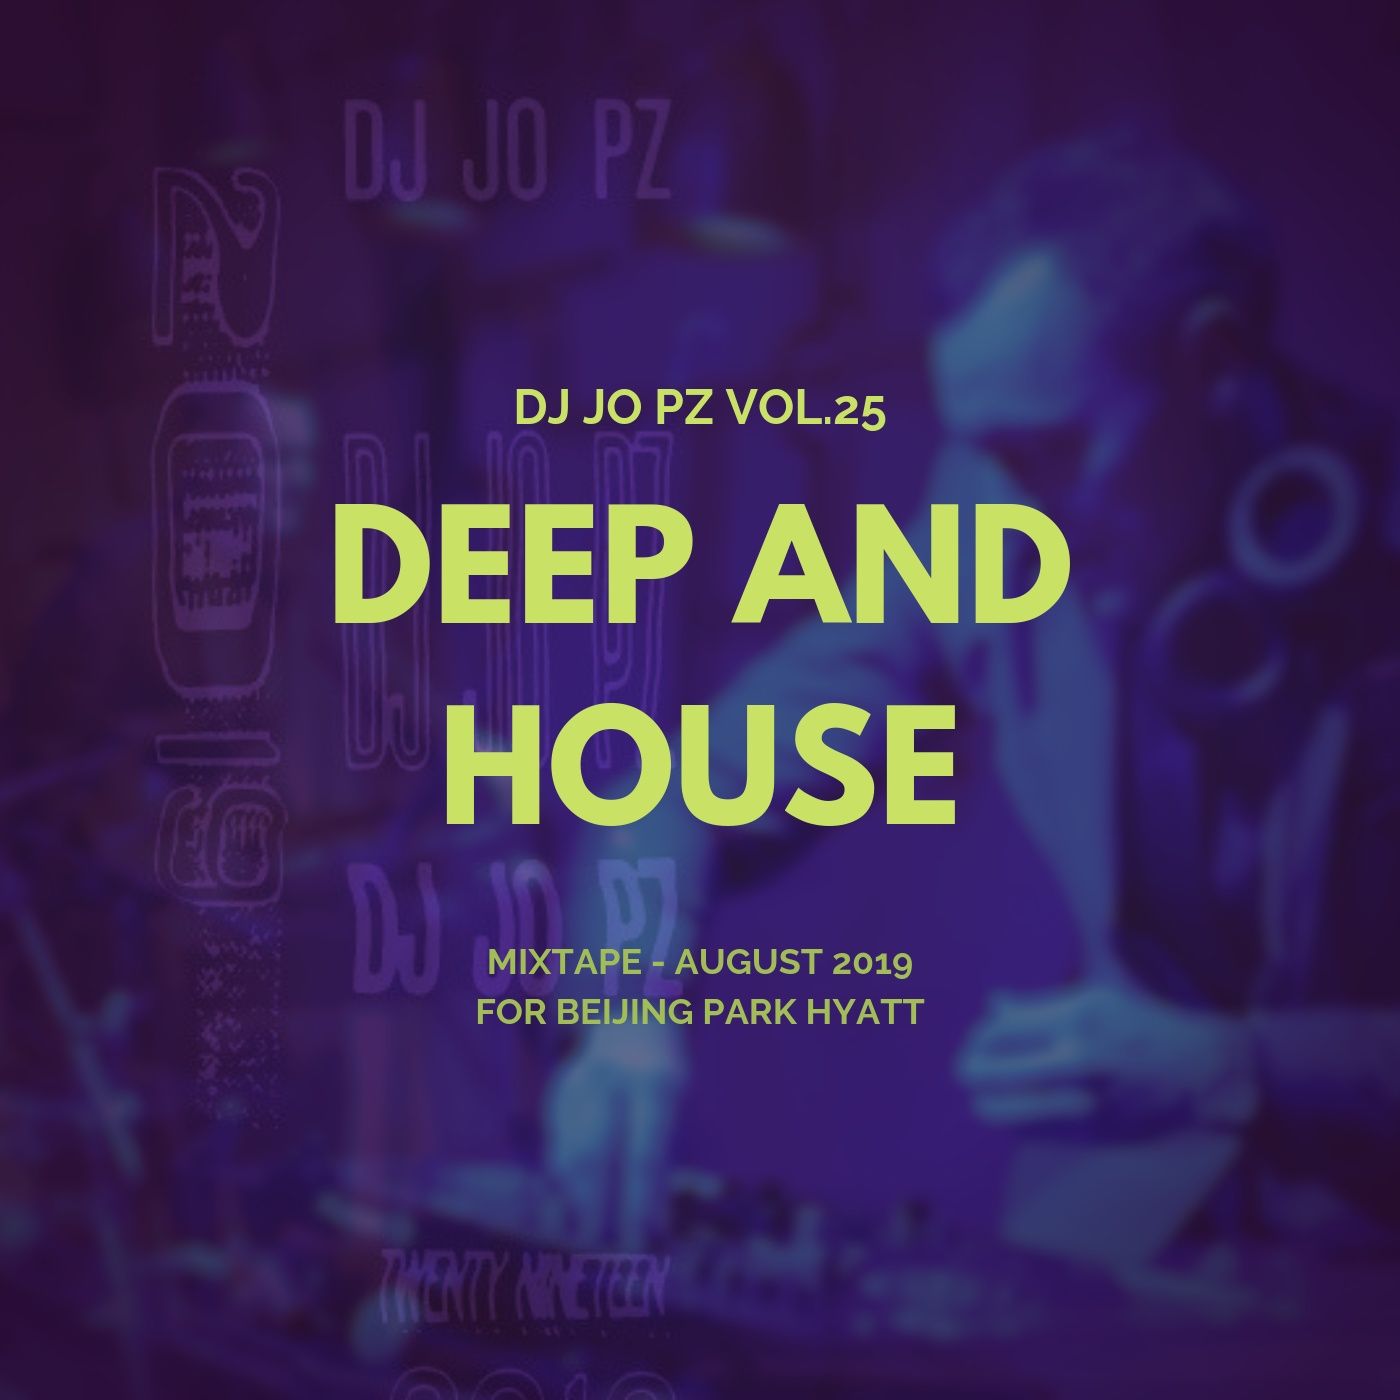 DJ JO PZ Vol. 25 - August 2019 Party Deep and House